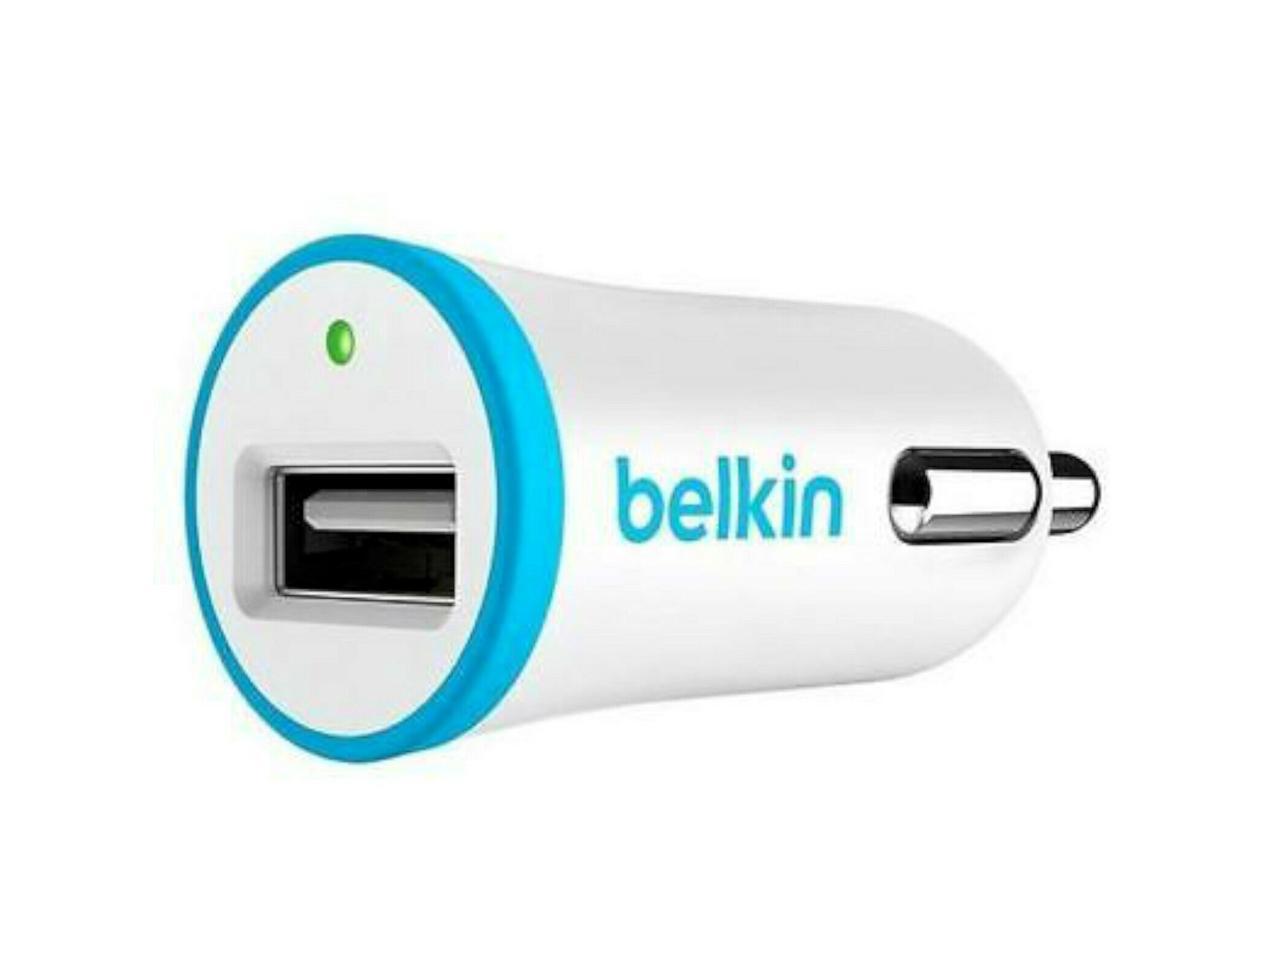 NEW Belkin MIXIT White / Blue Universal USB Car Charger Fast Charging 2.4A